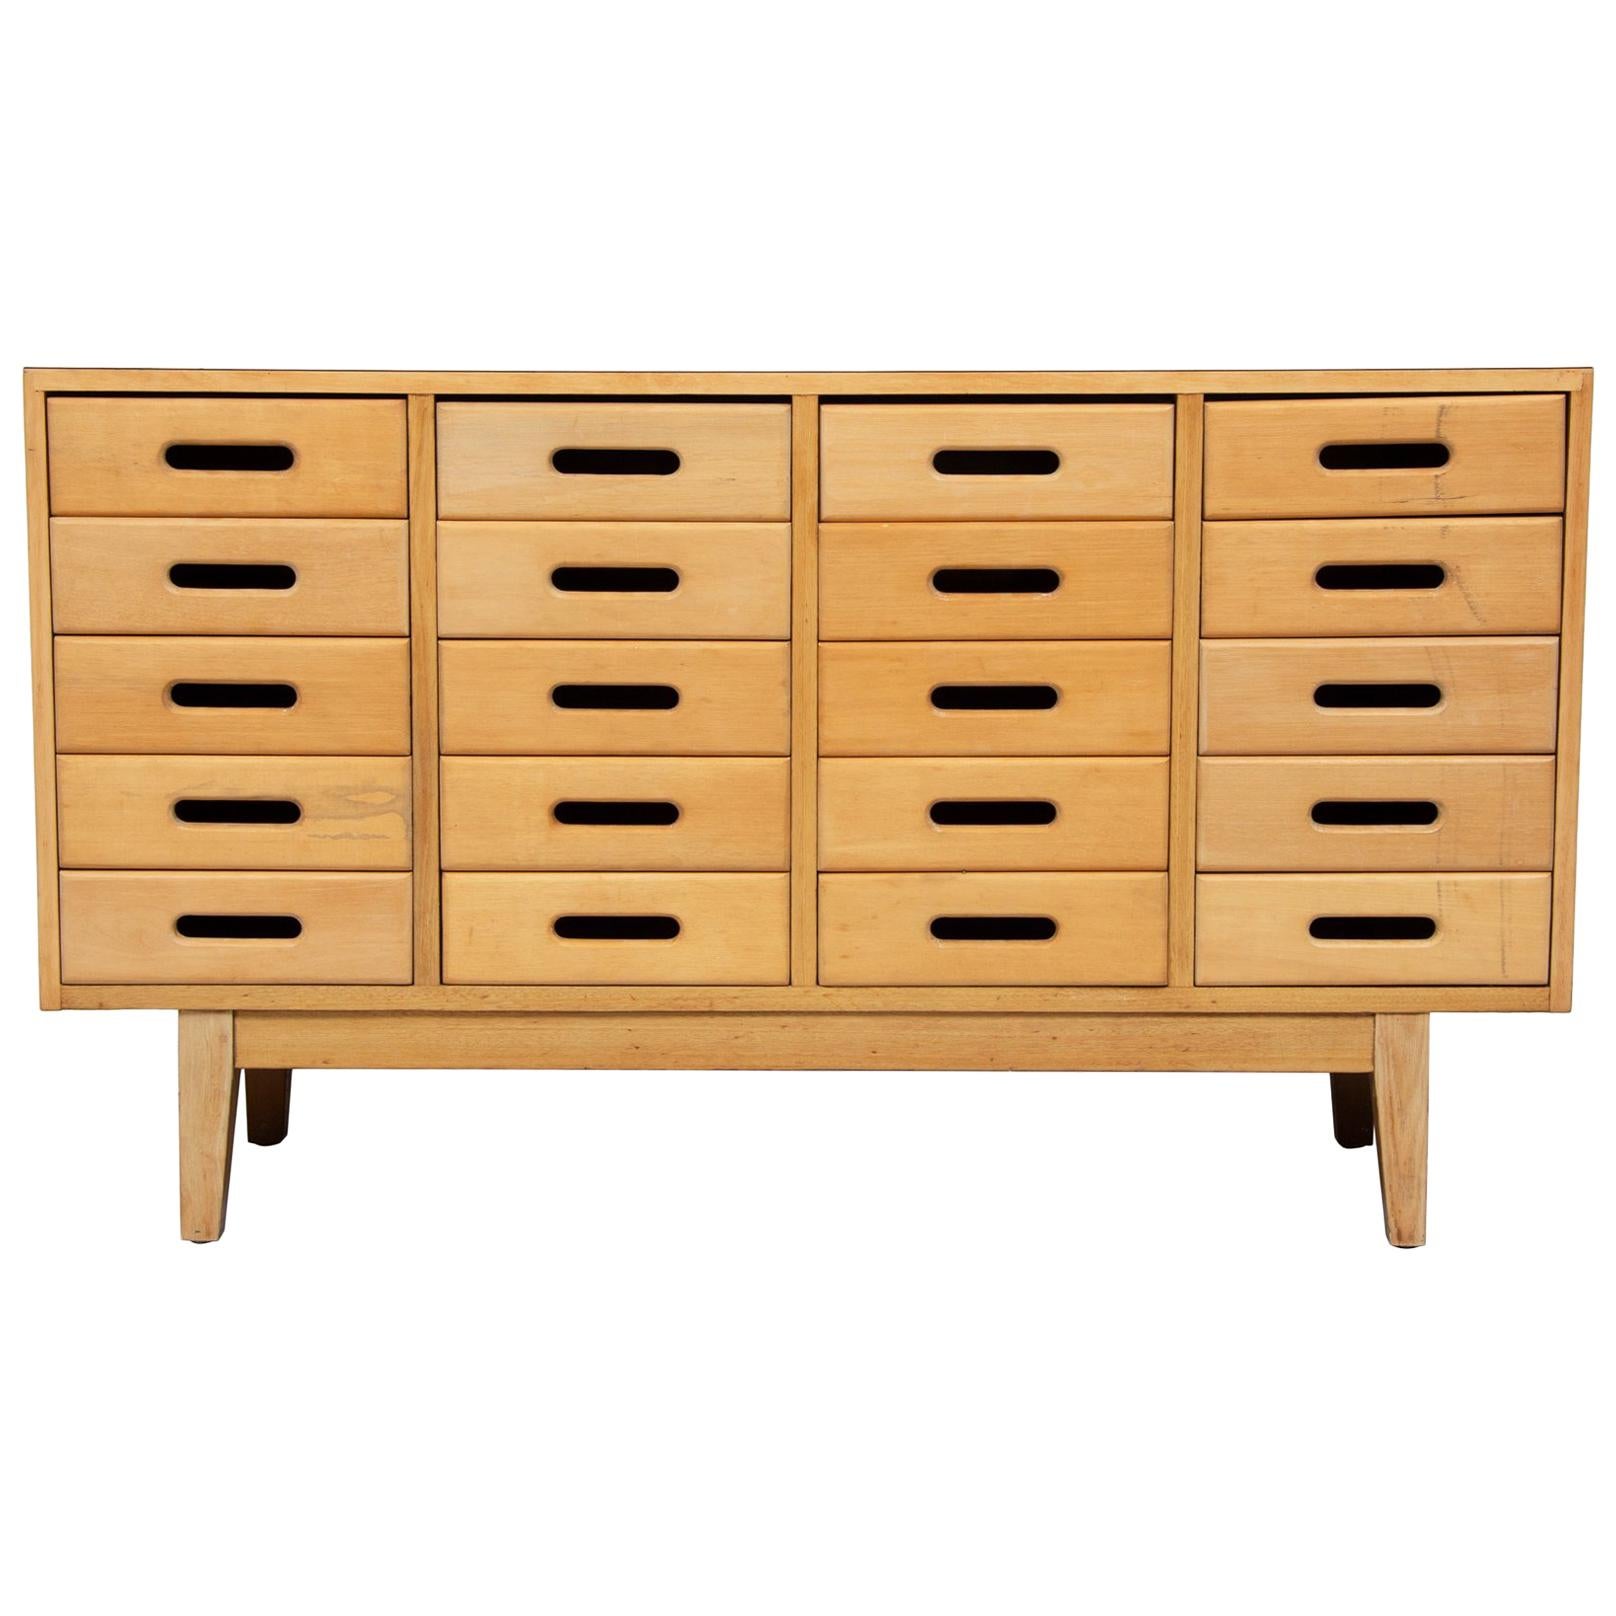 James Leonard for Esavian Chest of 20 School Drawers with Formica Top